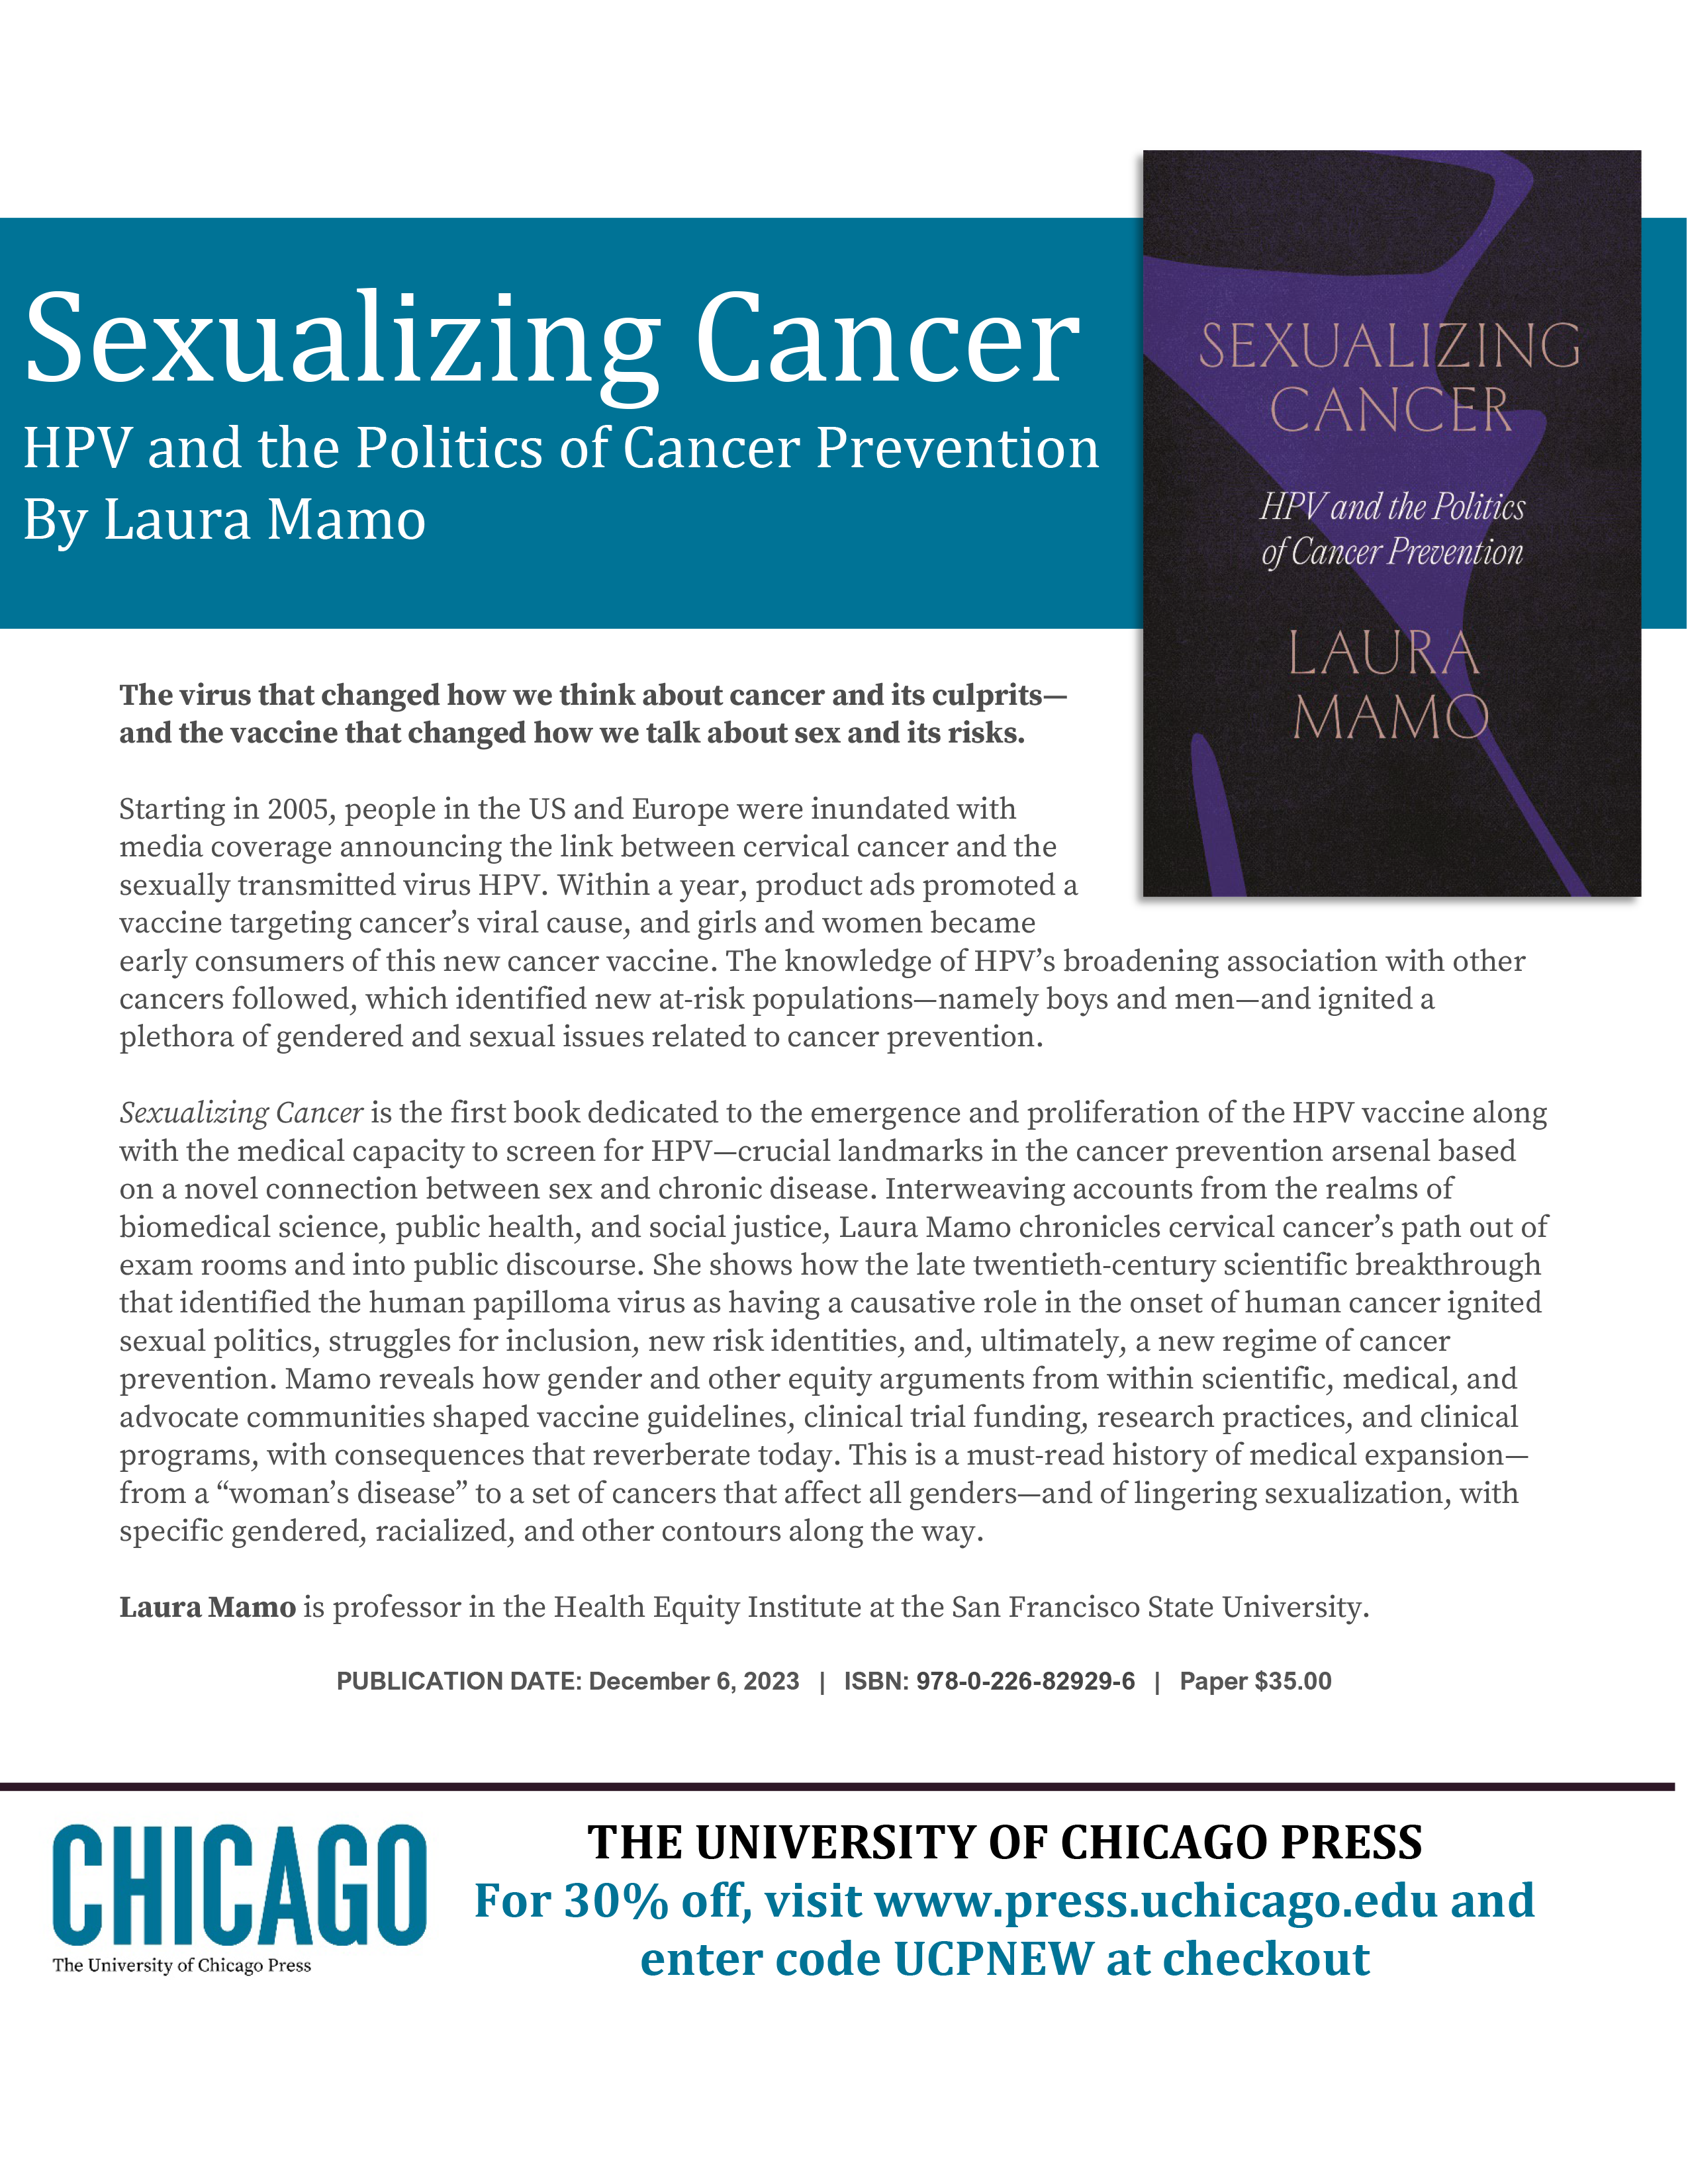 A flyer publicizing Laura Mamo's book, Sexualizing Cancer